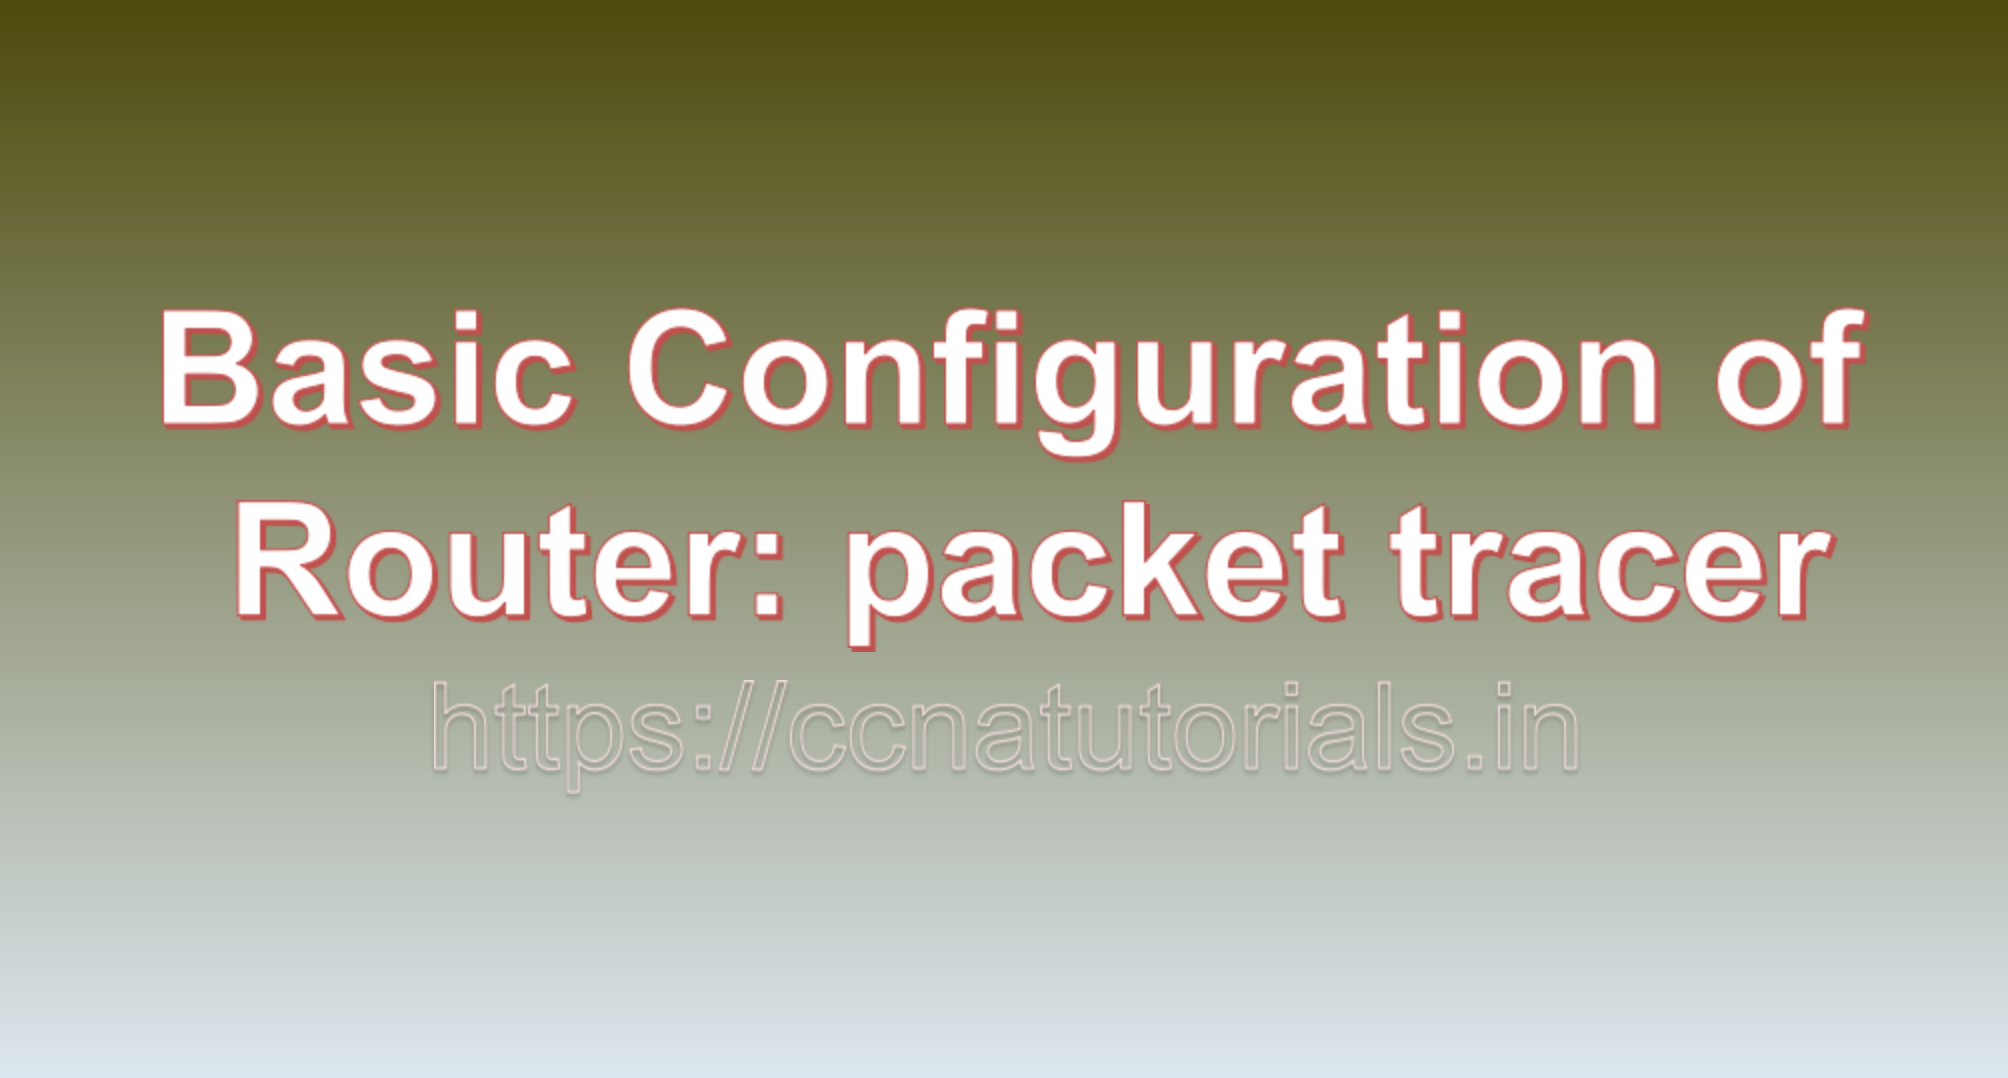 Basic Configuration of Router: packet tracer, ccna, ccna tutorials